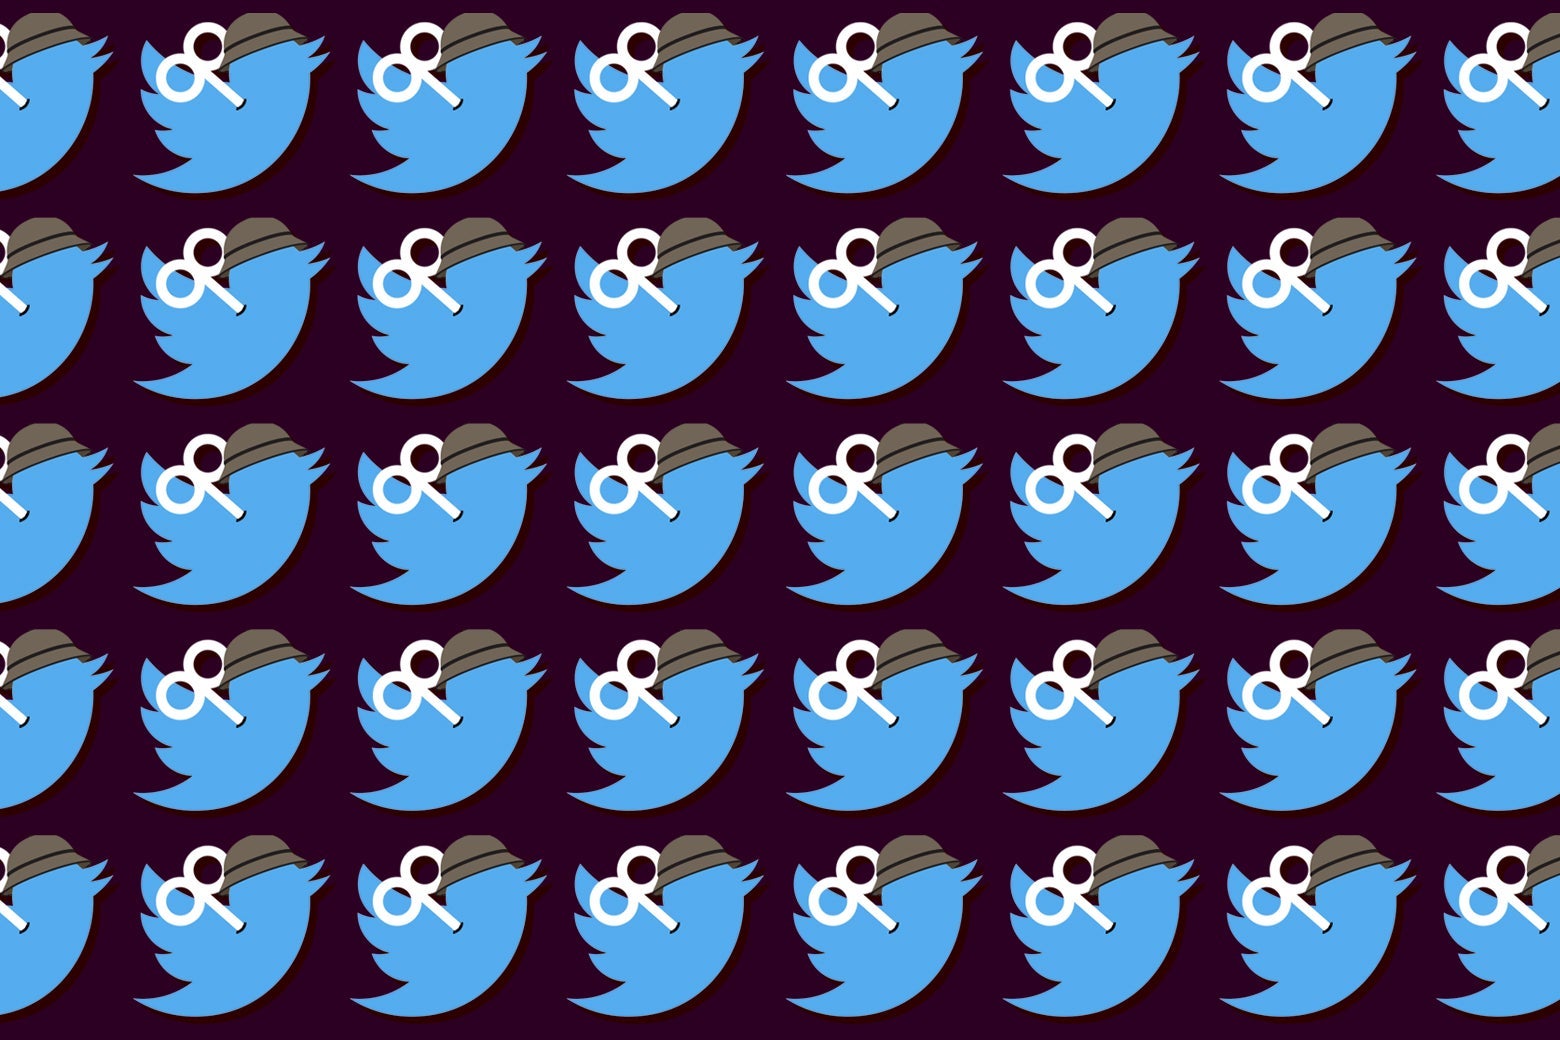 A repeating pattern of blue Twitter birds, each with a wind-up key and a helmet.